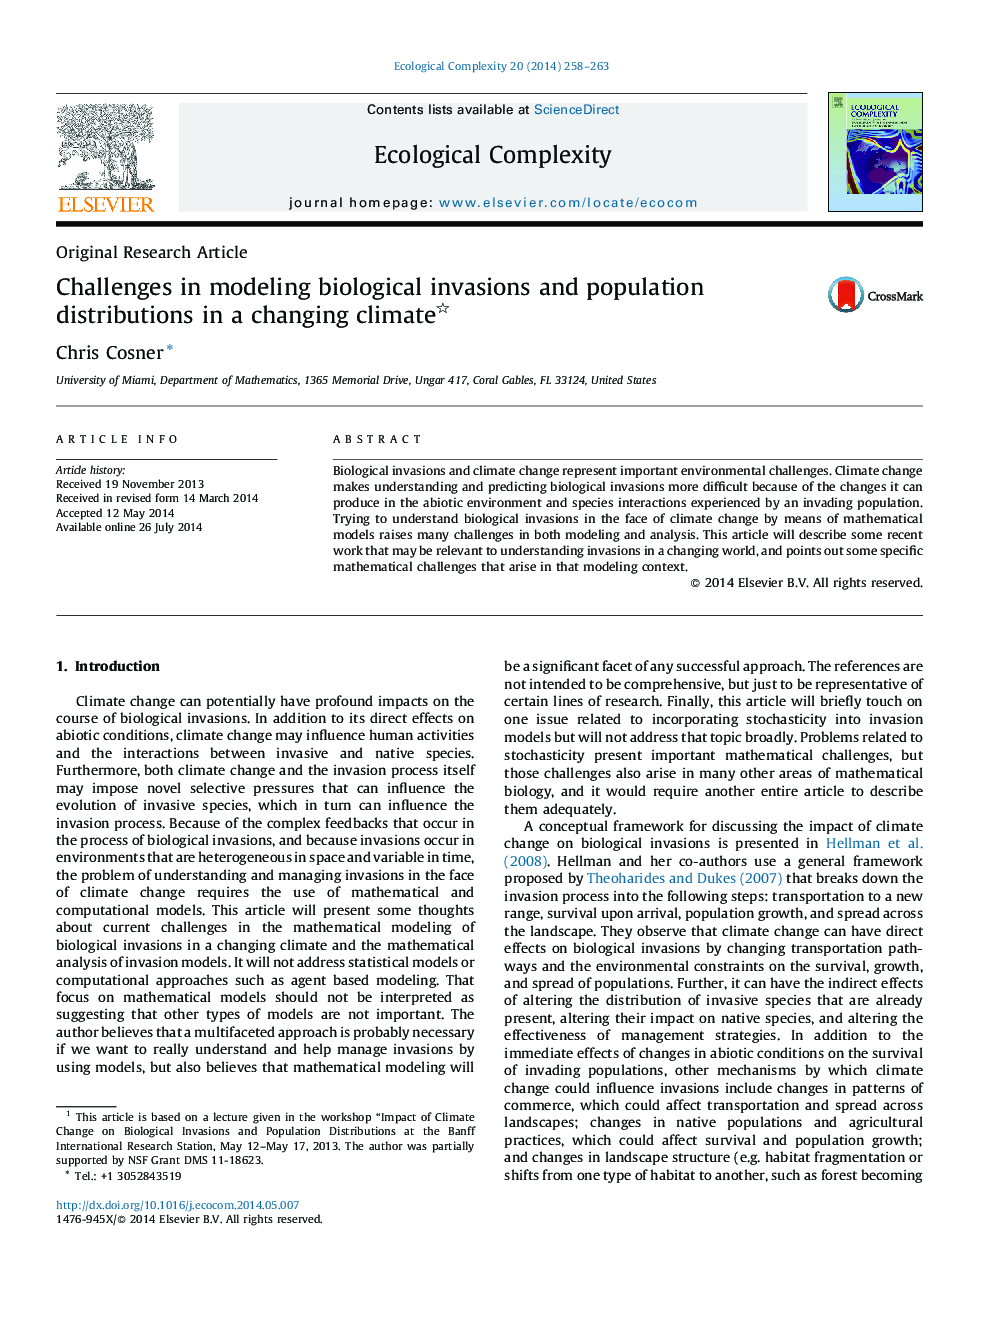 Challenges in modeling biological invasions and population distributions in a changing climate 1